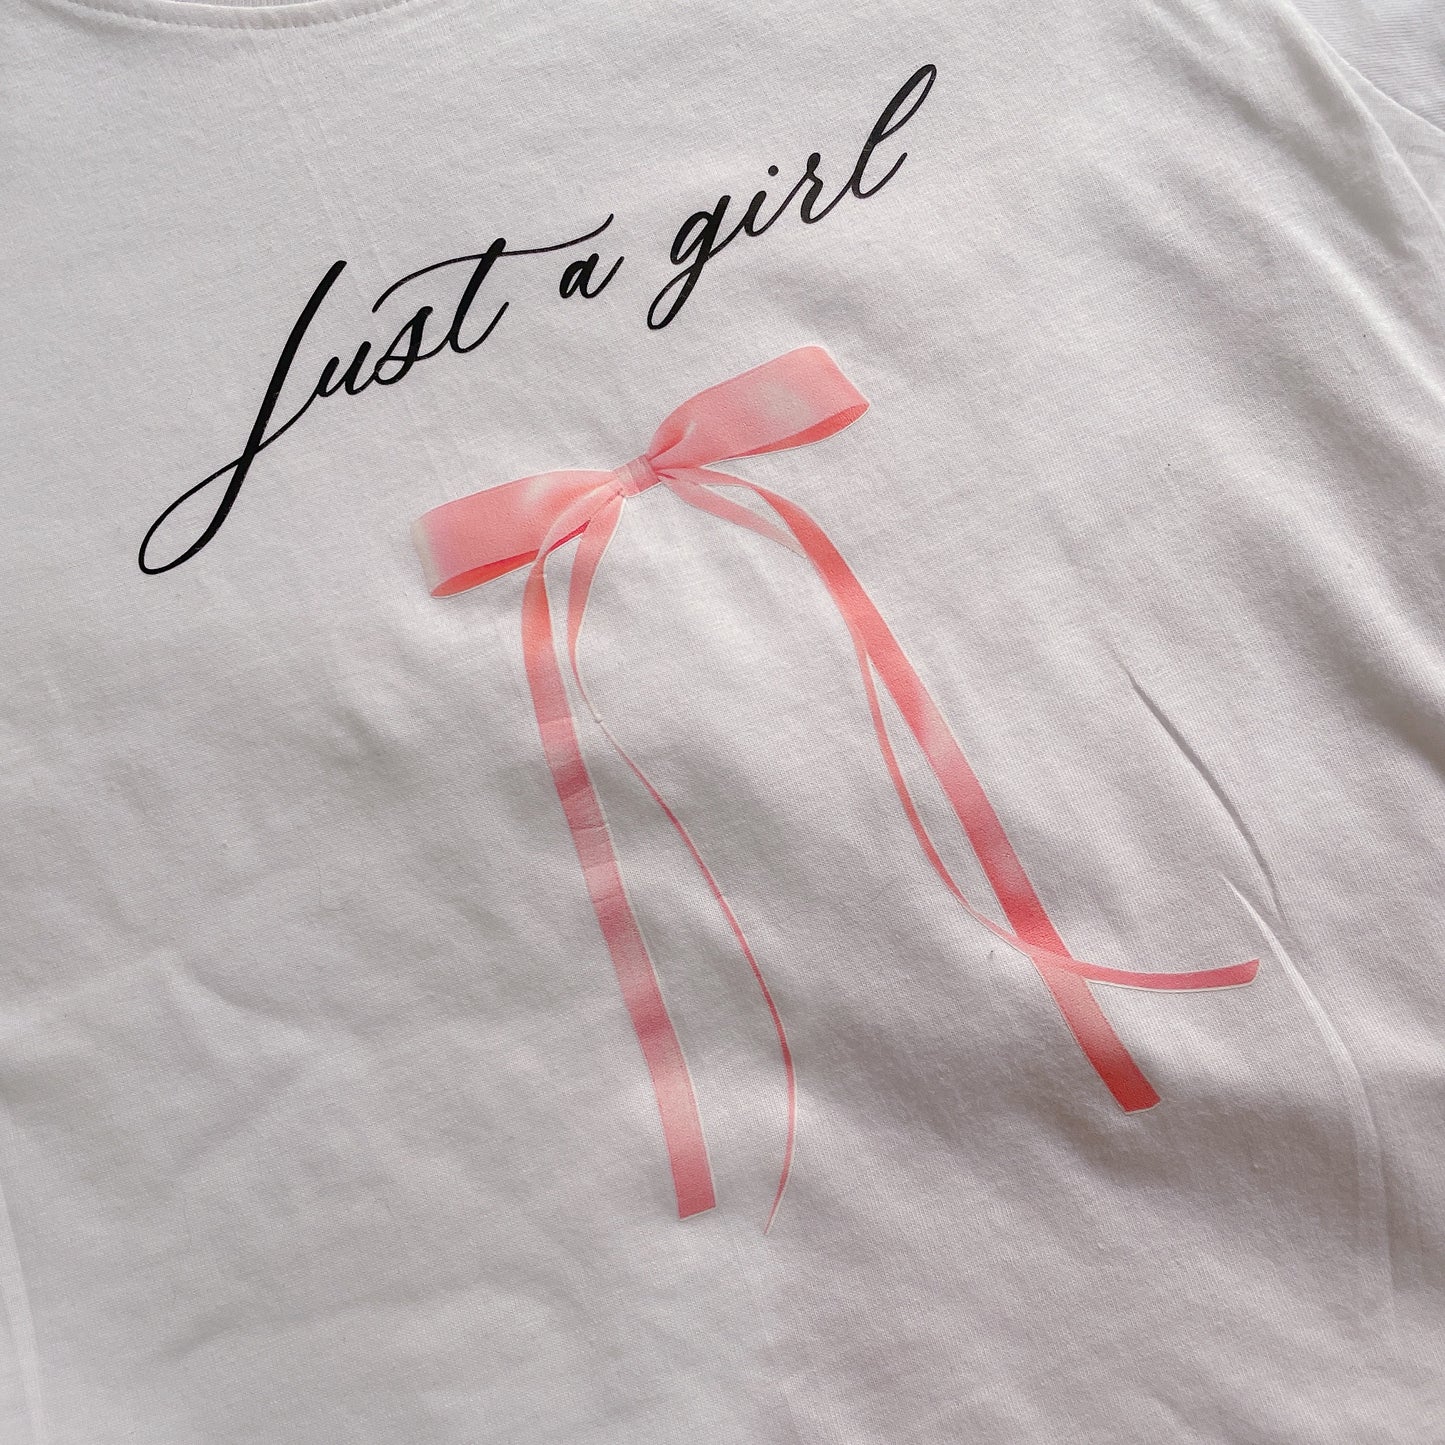 Just a girl bow Baby tee